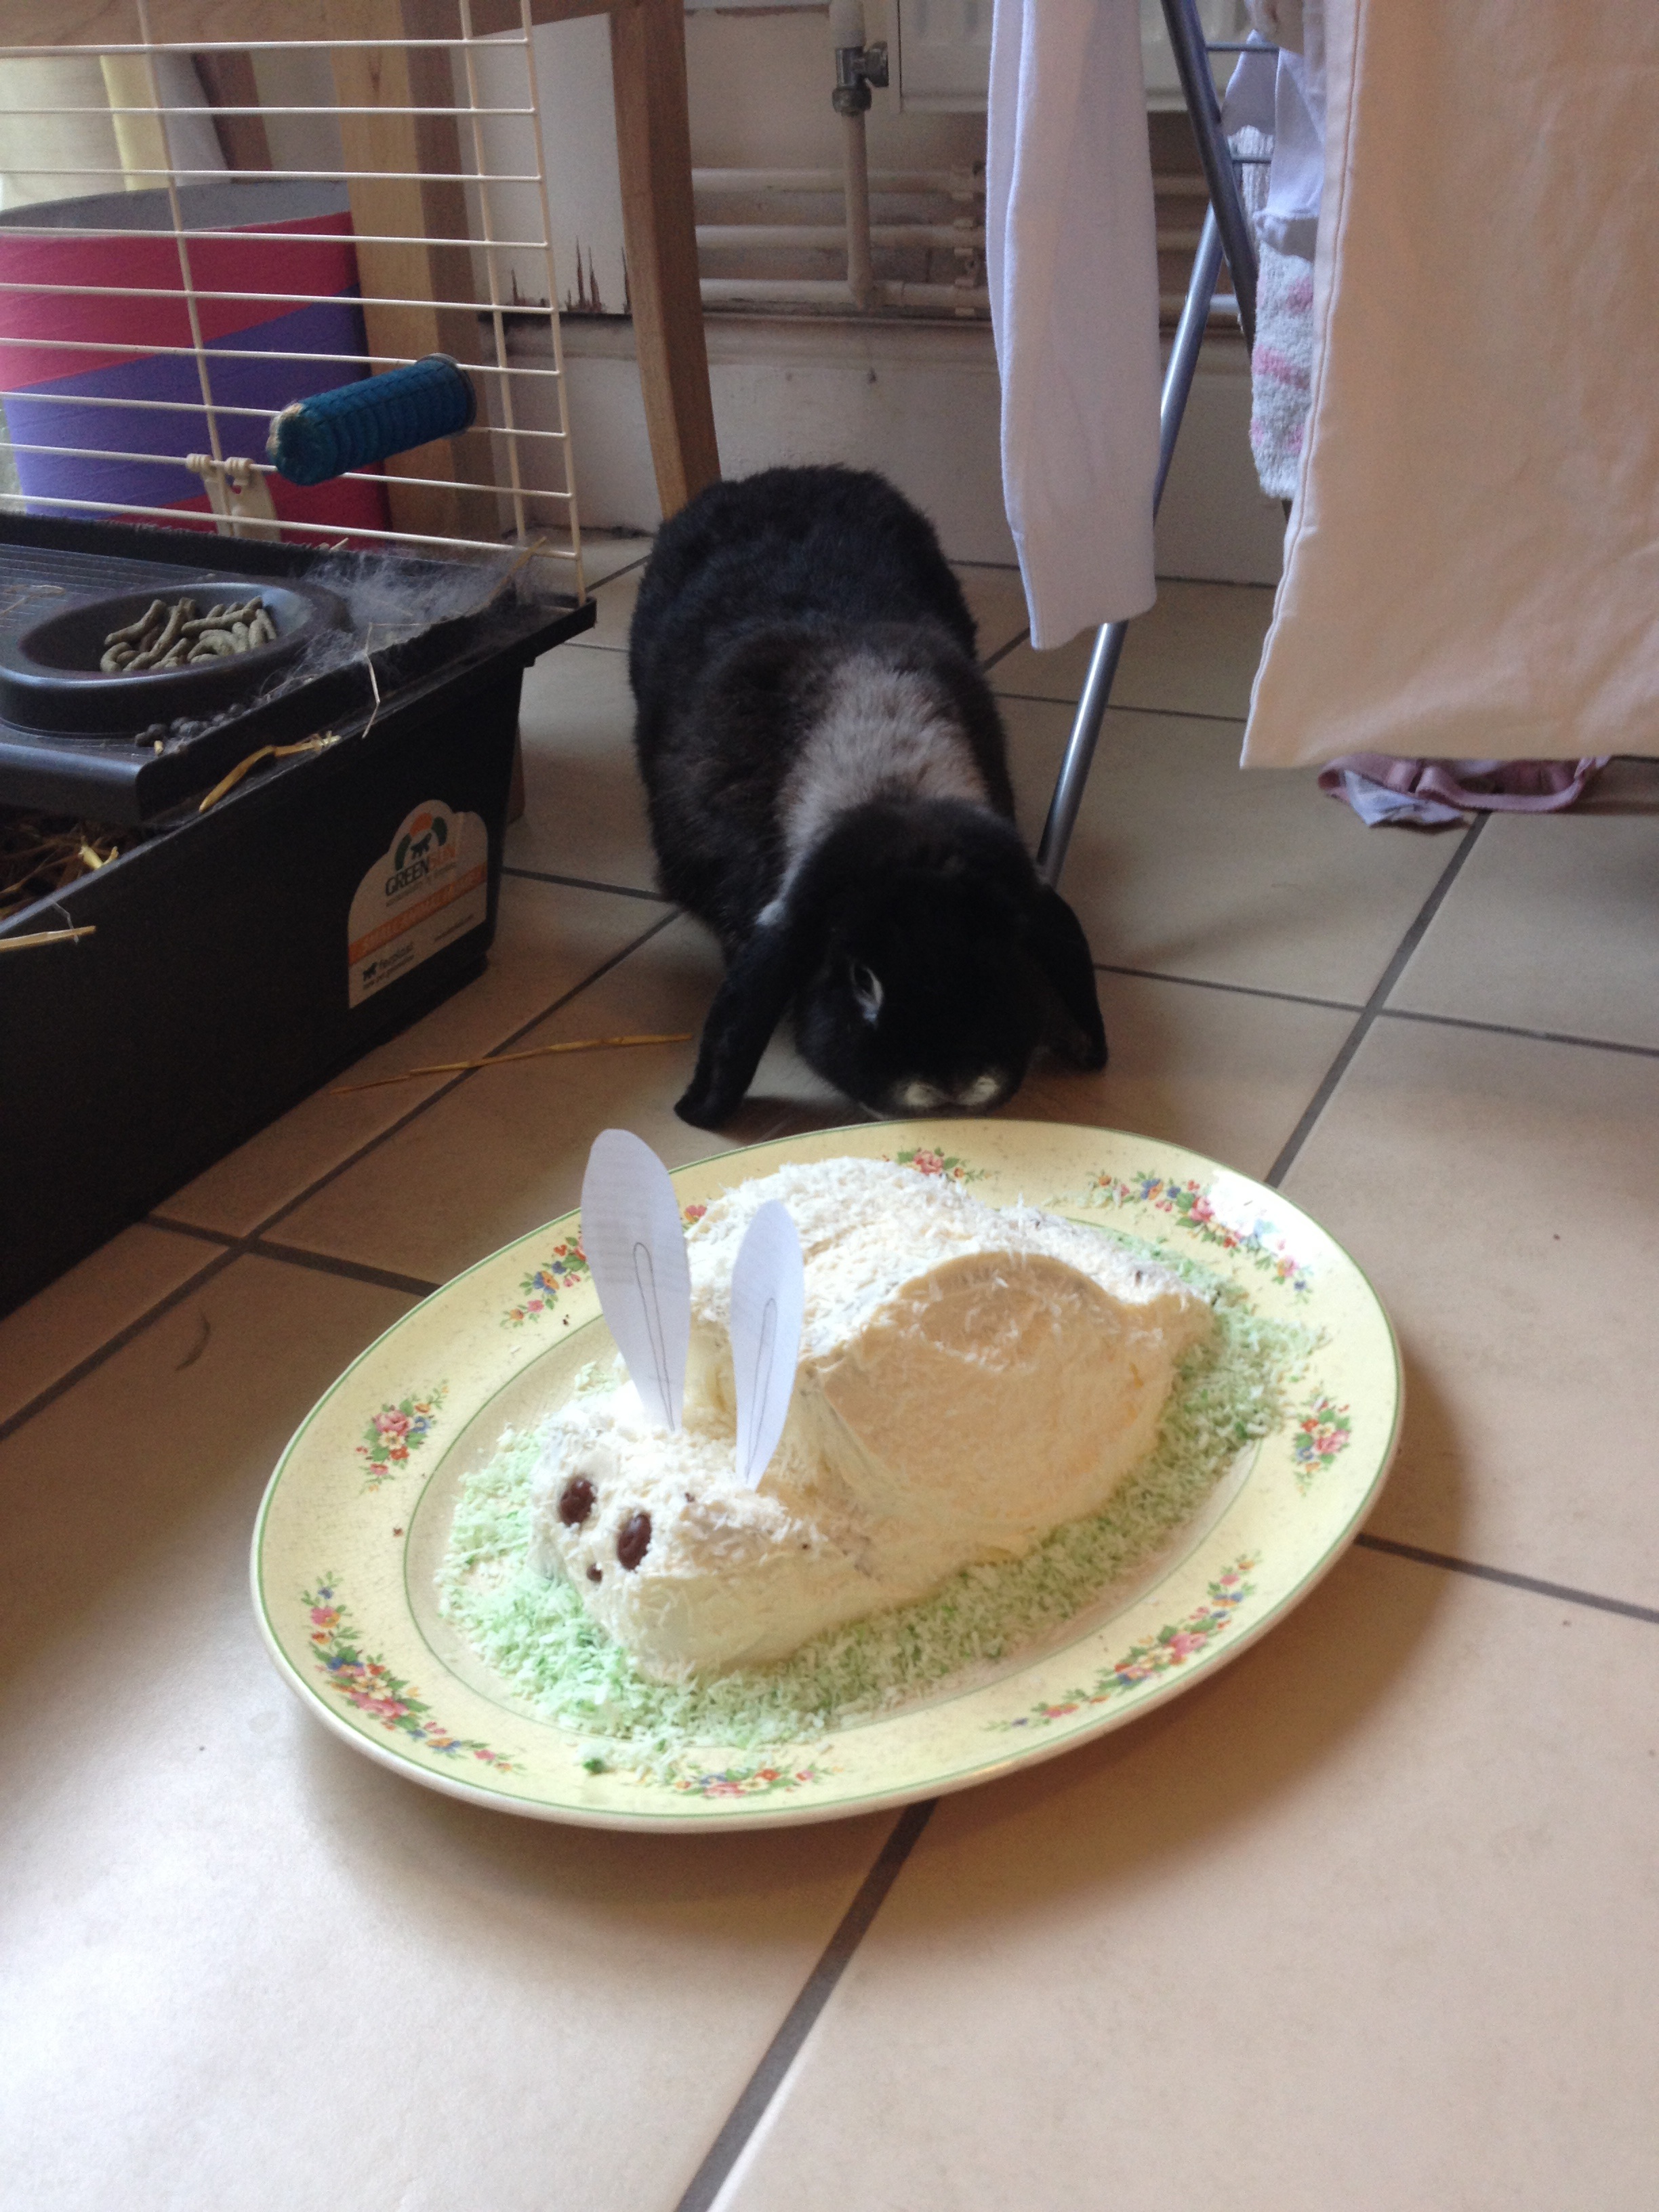 Bunny Is Puzzled by This New Bunny-Shaped, Sweet-Smelling Thing